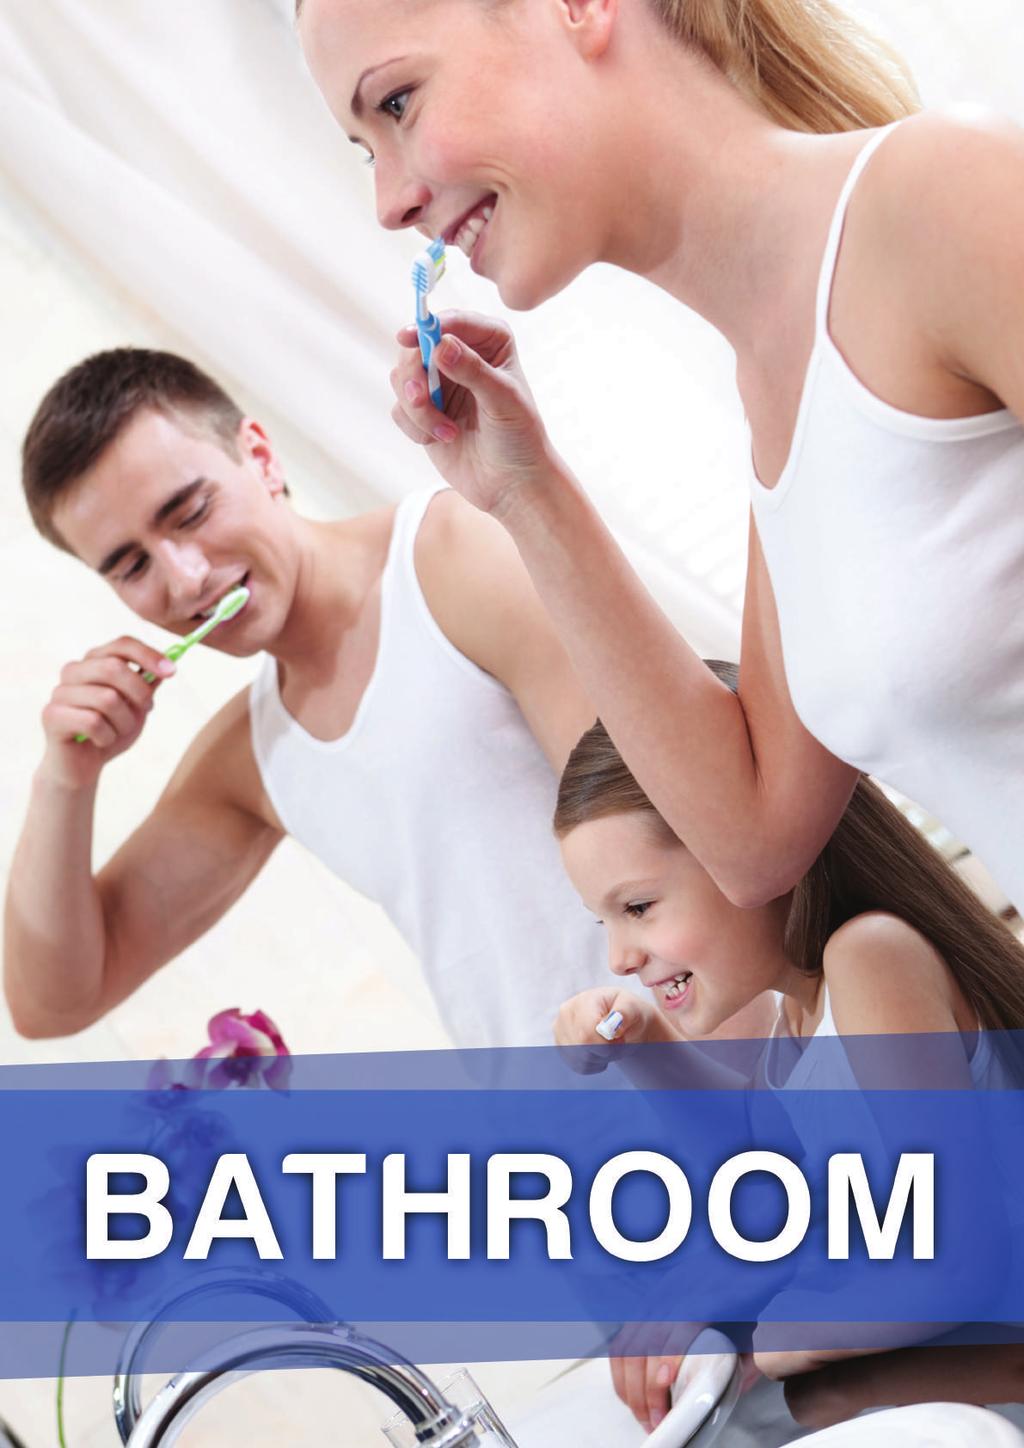 Toothbrushes /